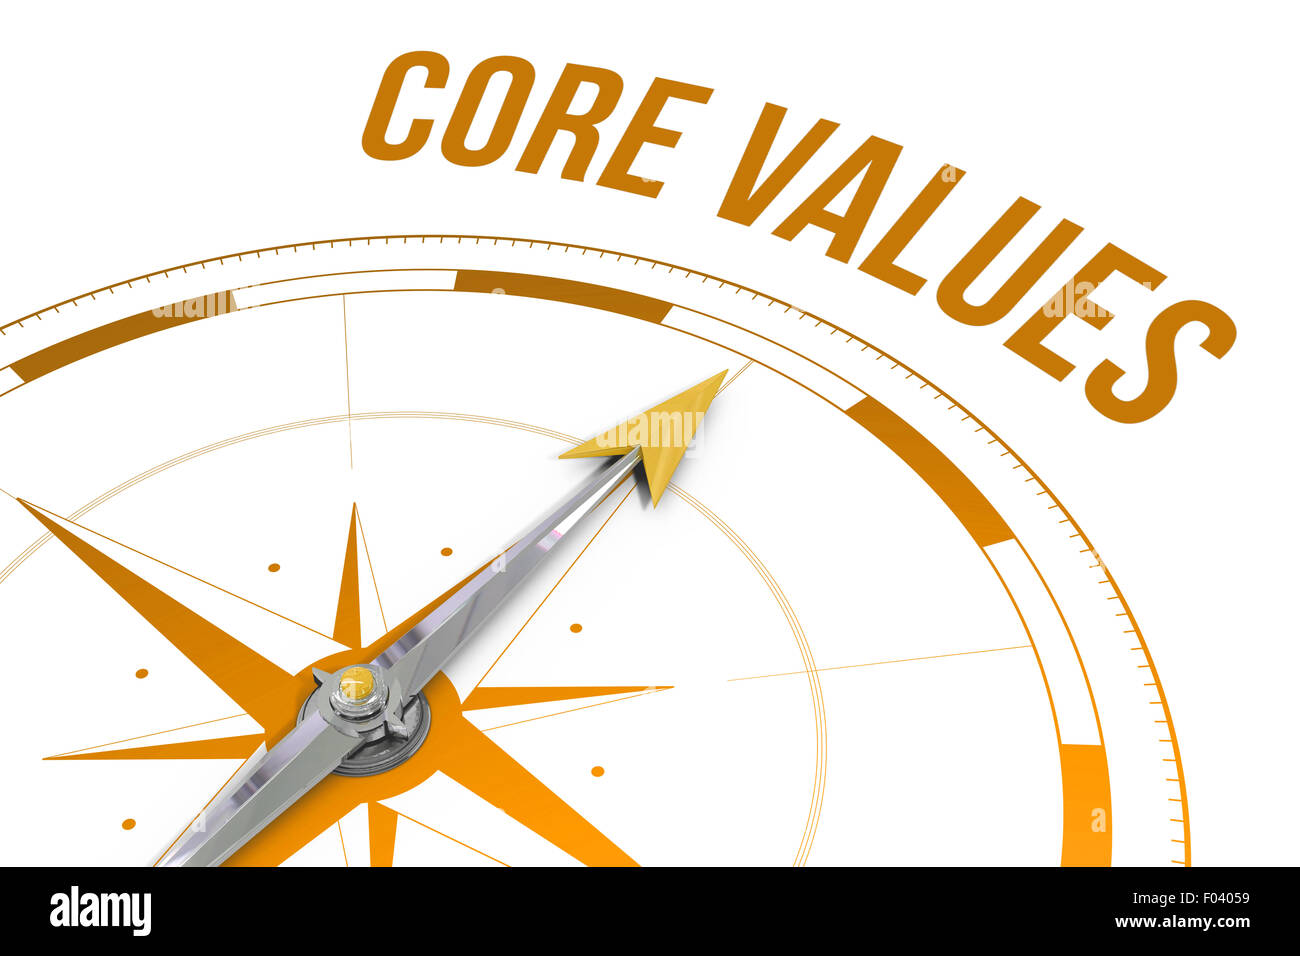 Core values against compass Stock Photo